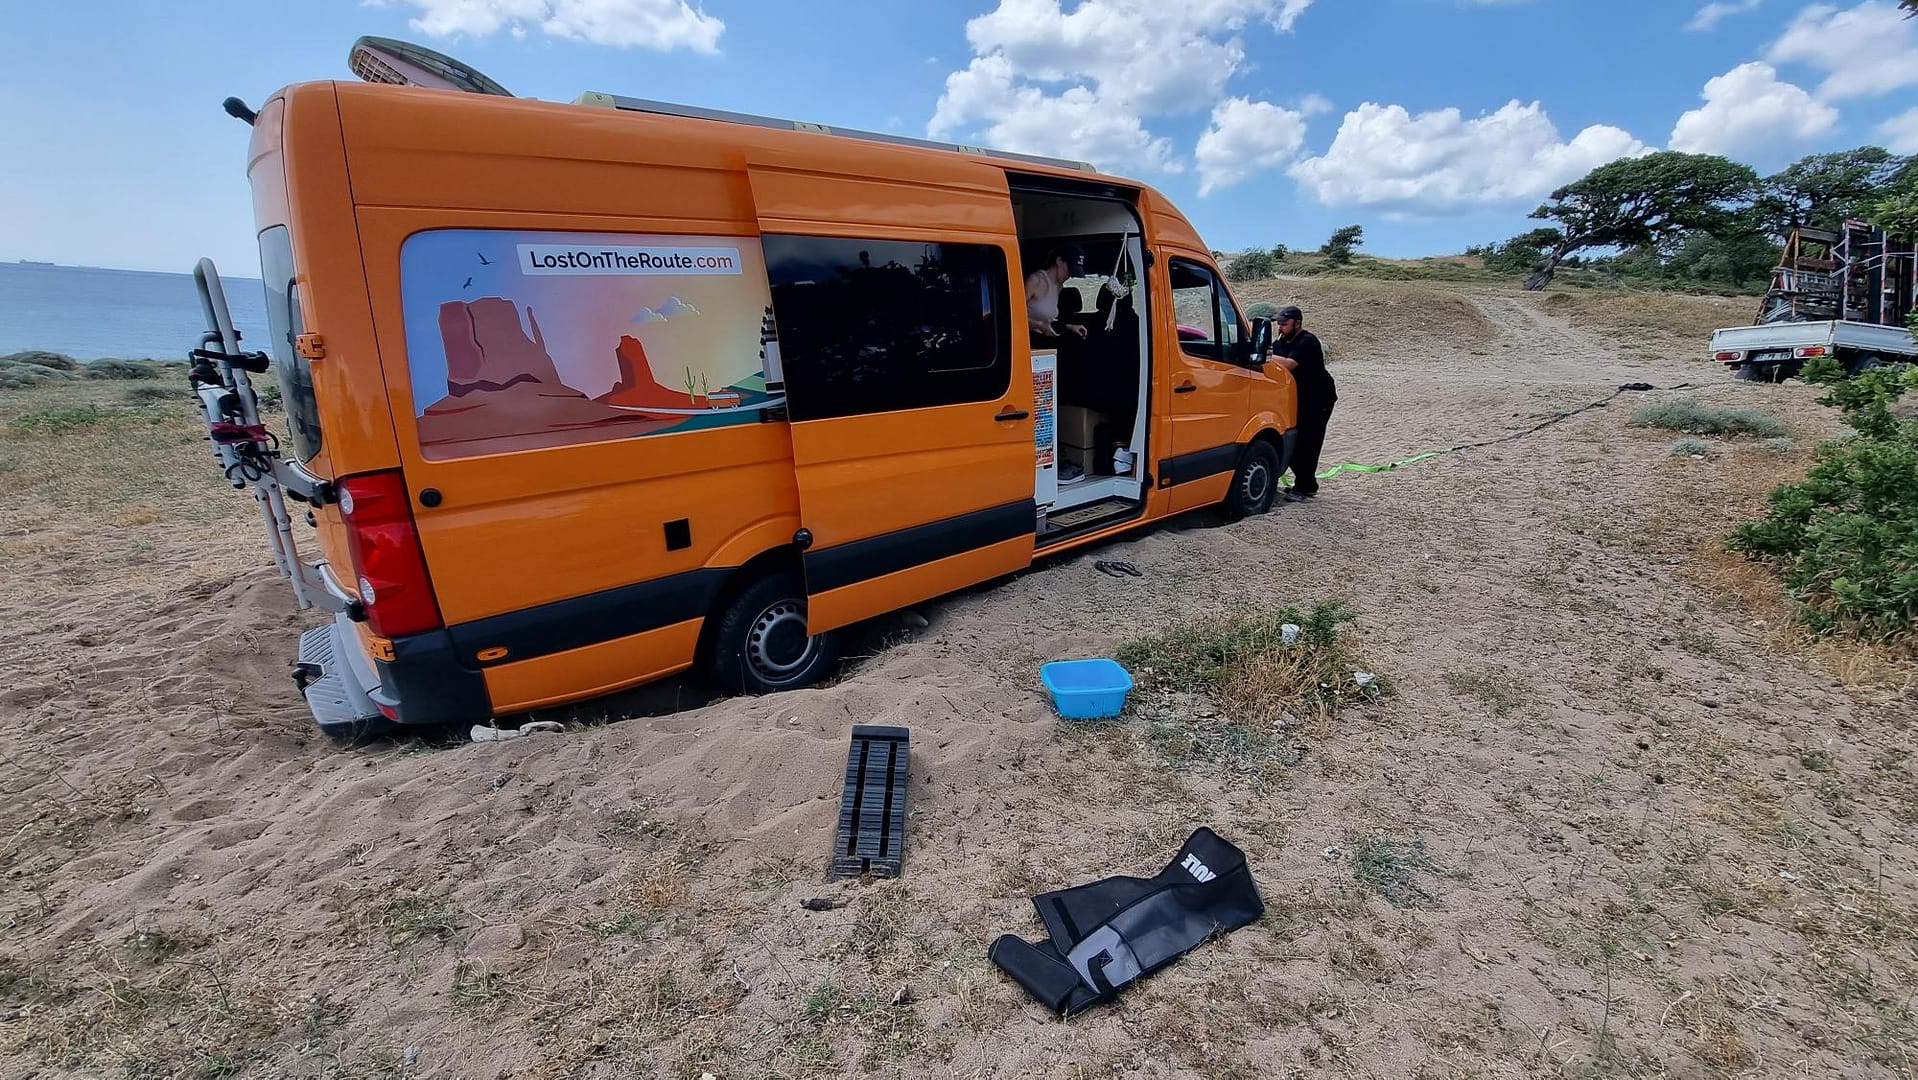 stranded with the campervan in turkey